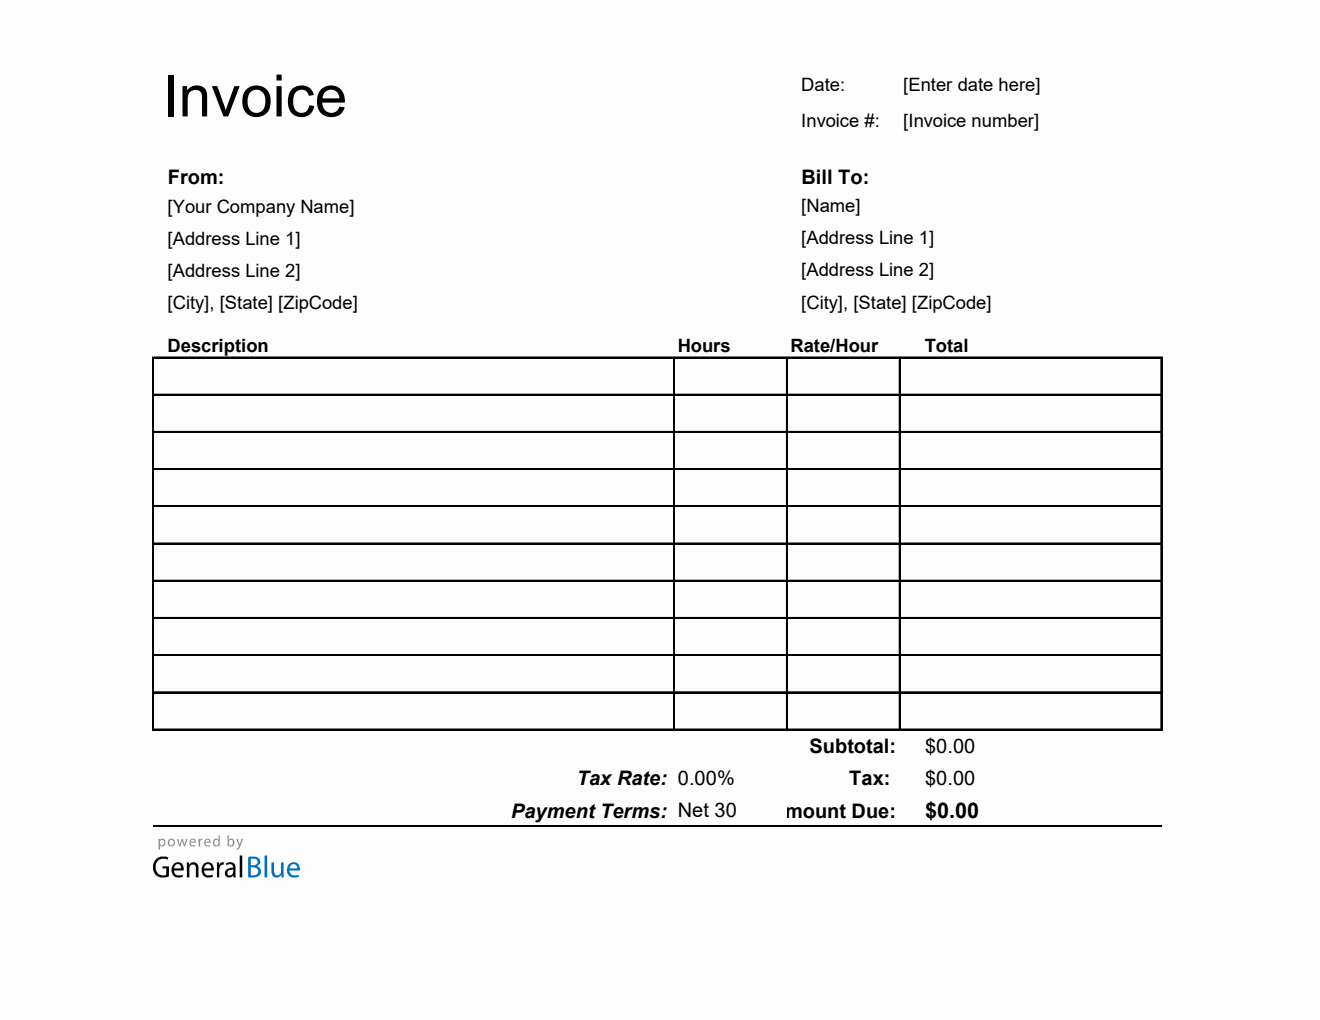 Excel Invoice Template for U.S. Freelancers With Tax calculation (Printable)